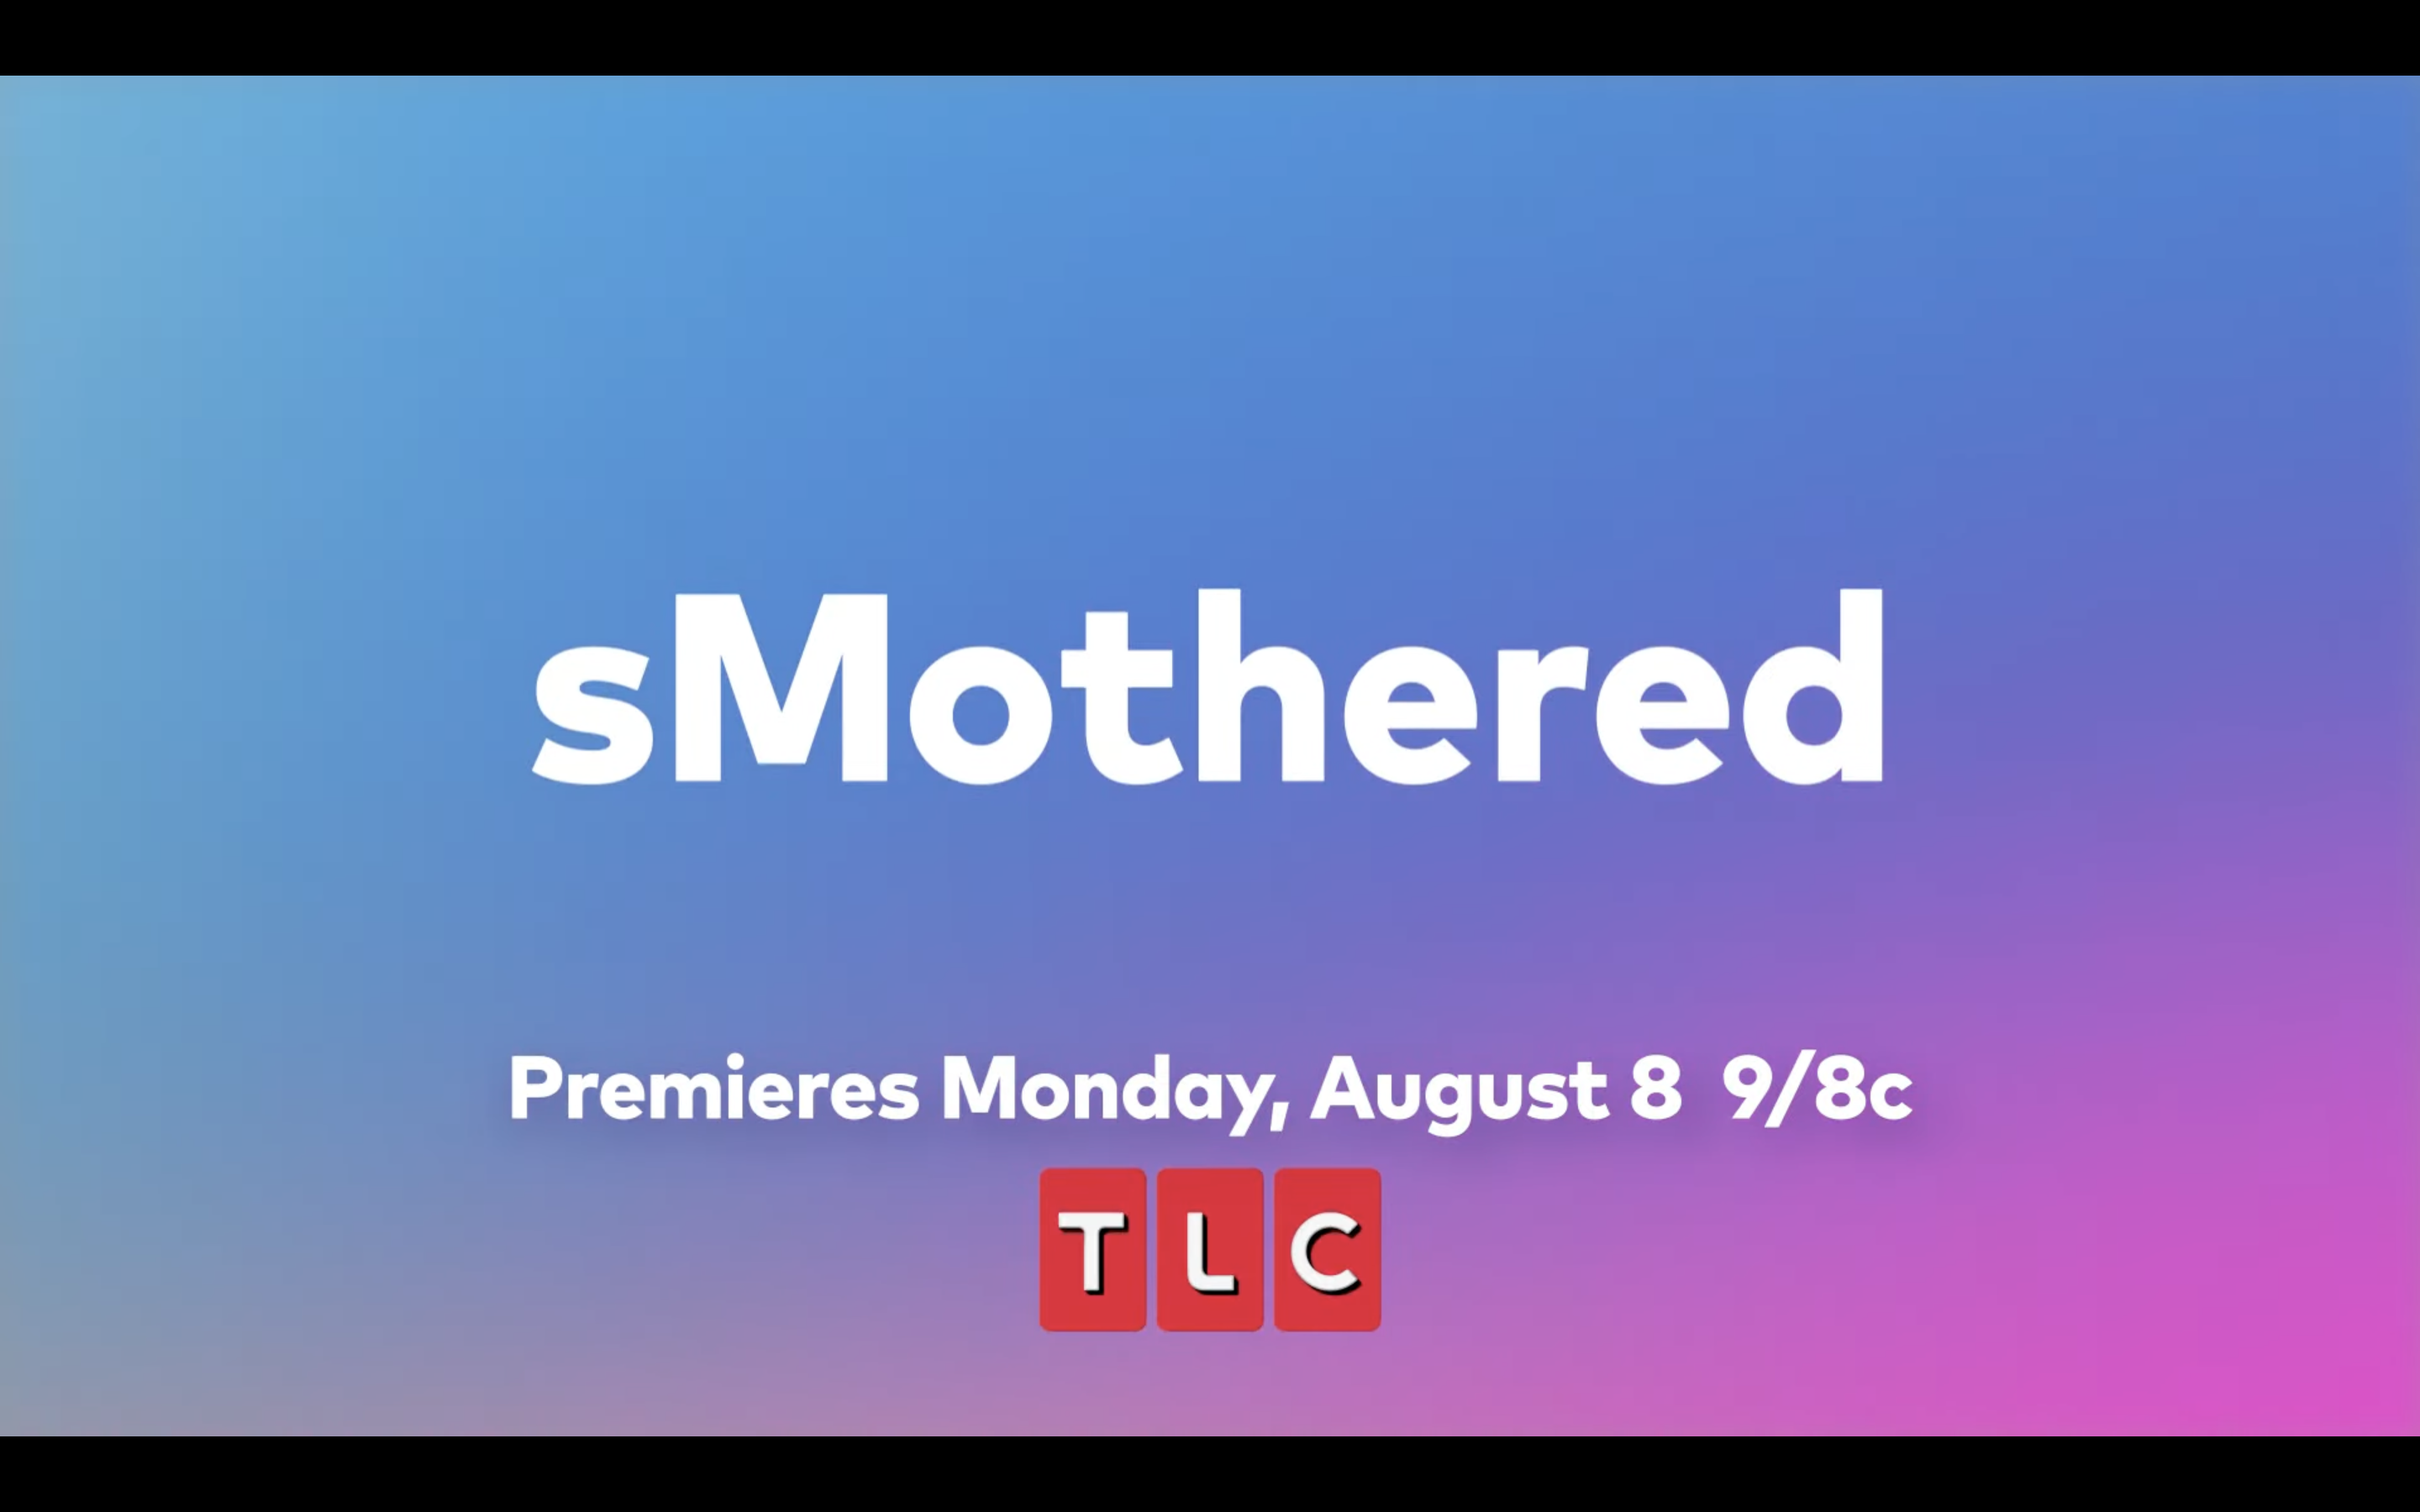 sMothered' Season 4 premiere: How to watch new season on TLC, TV channel,  start time, stream online for free 